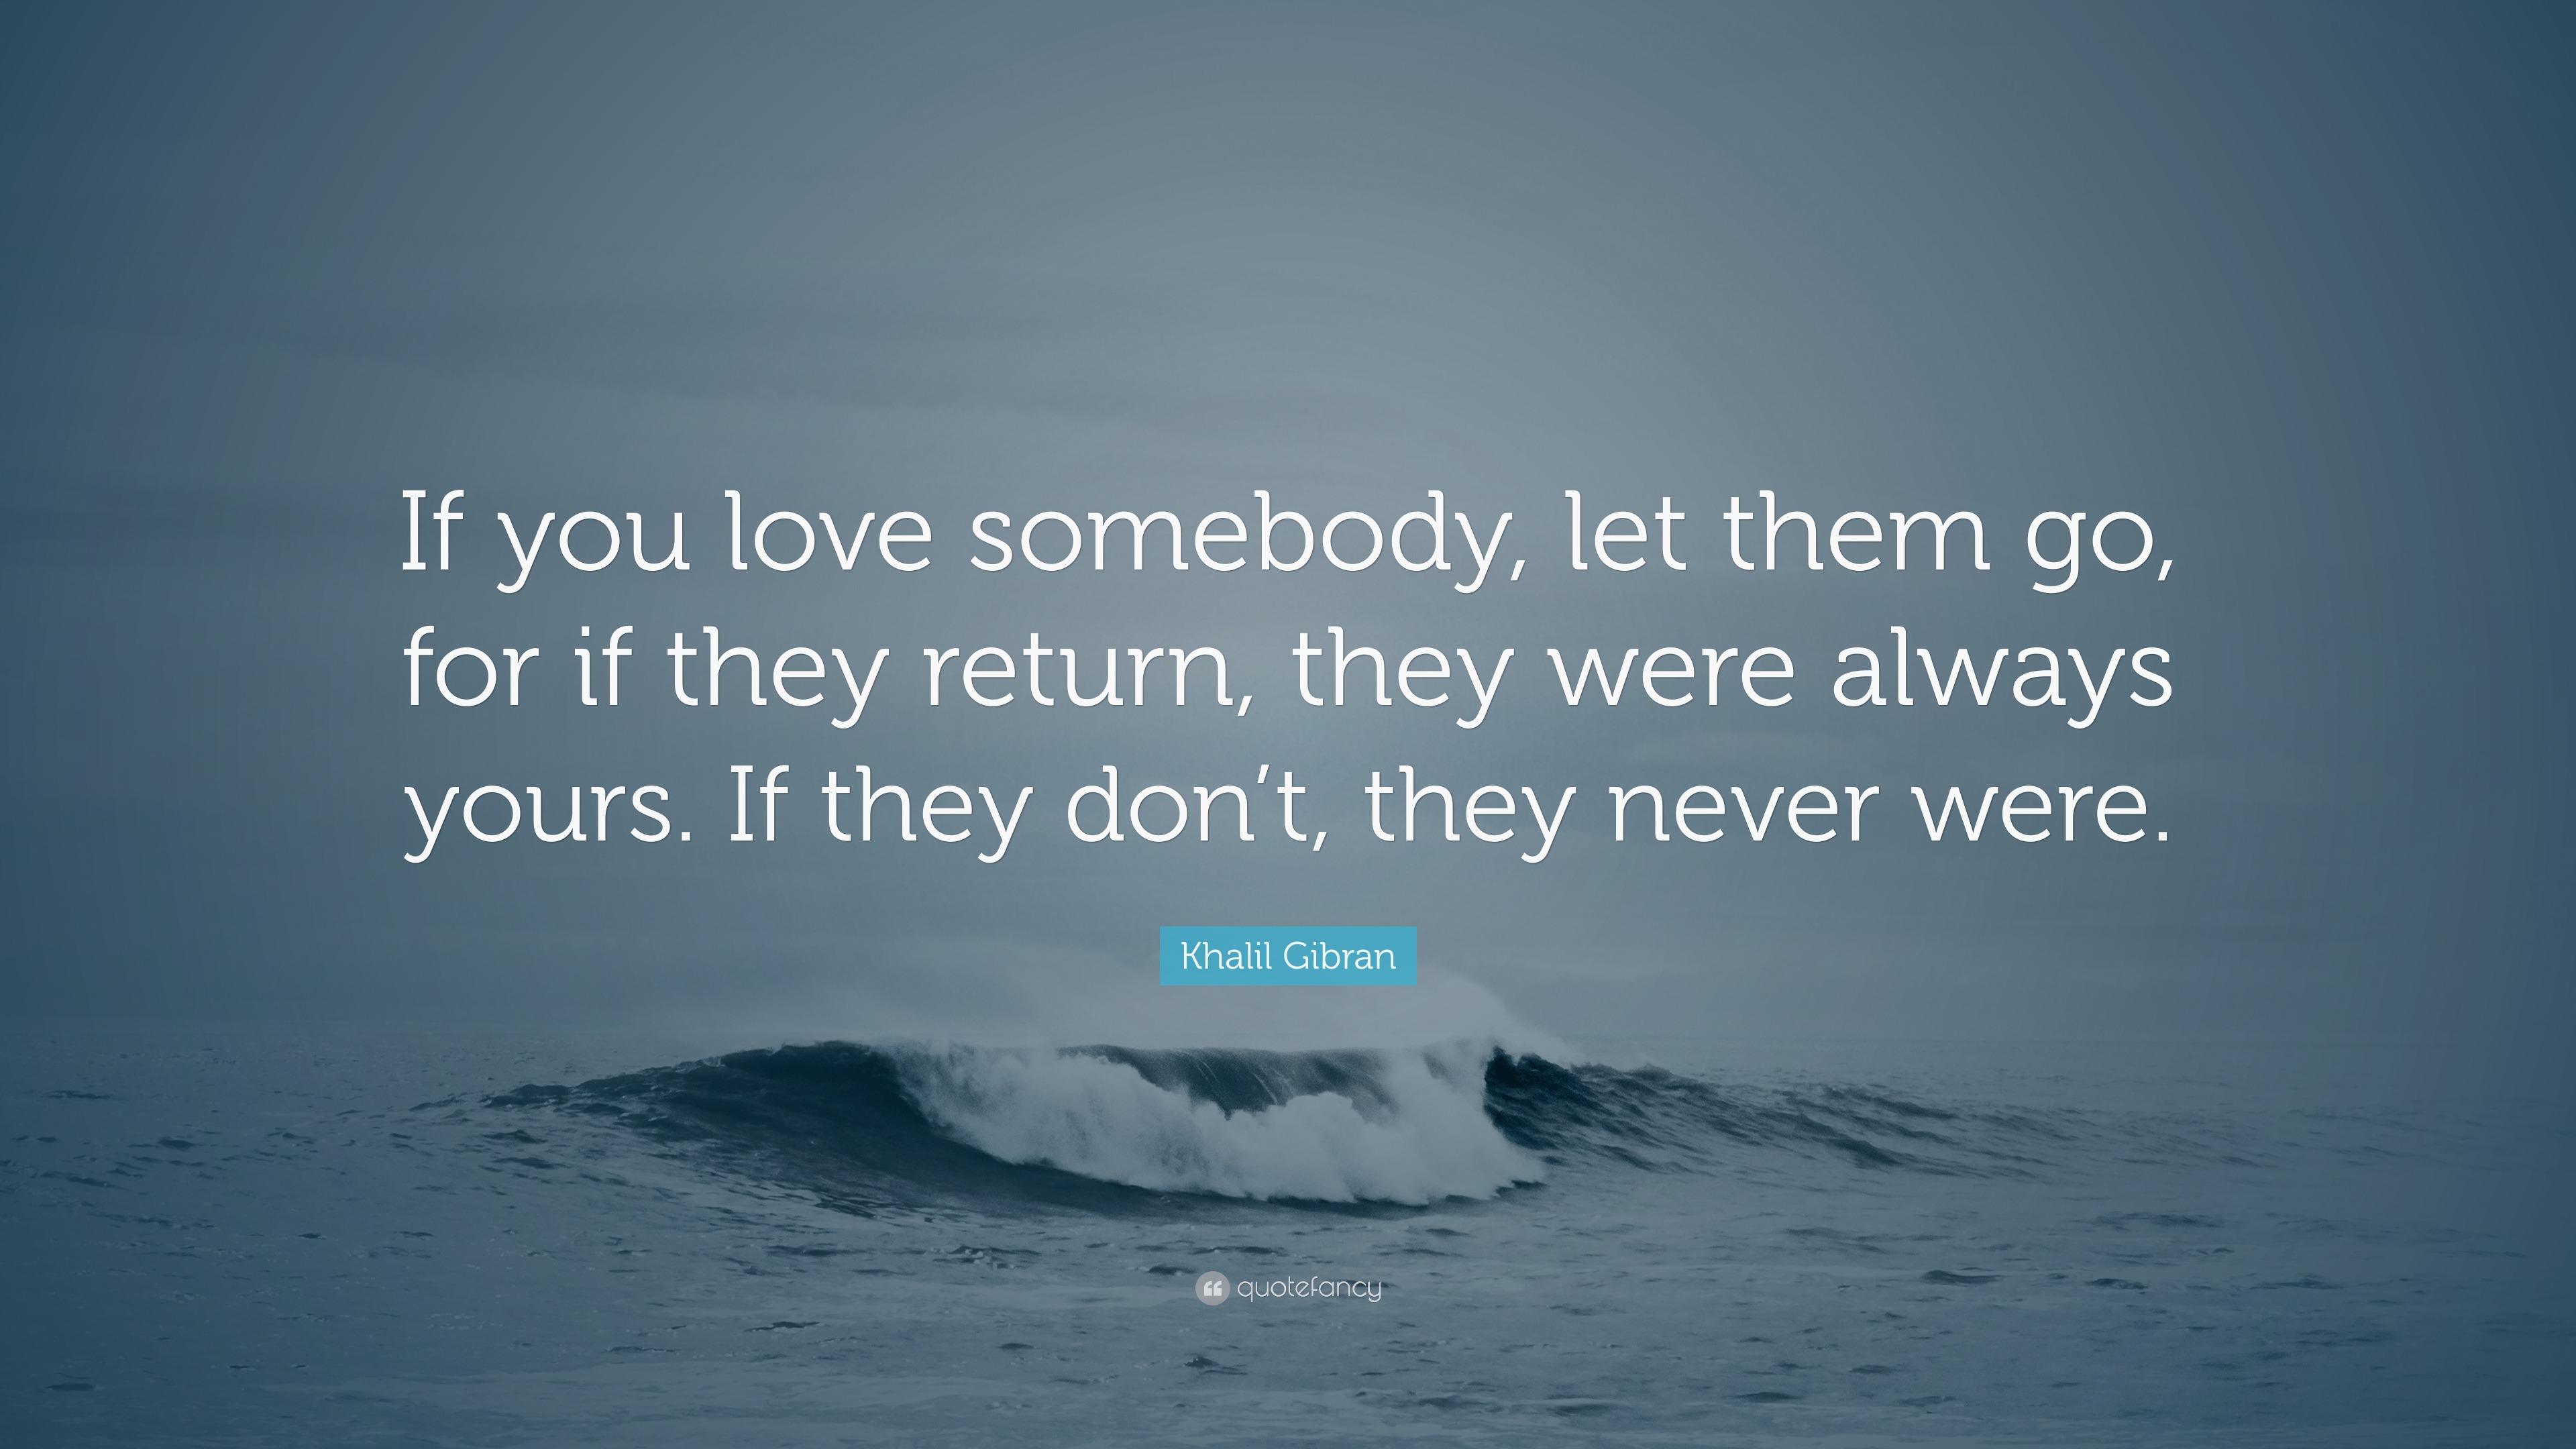 Khalil Gibran Quote “if You Love Somebody Let Them Go For If They